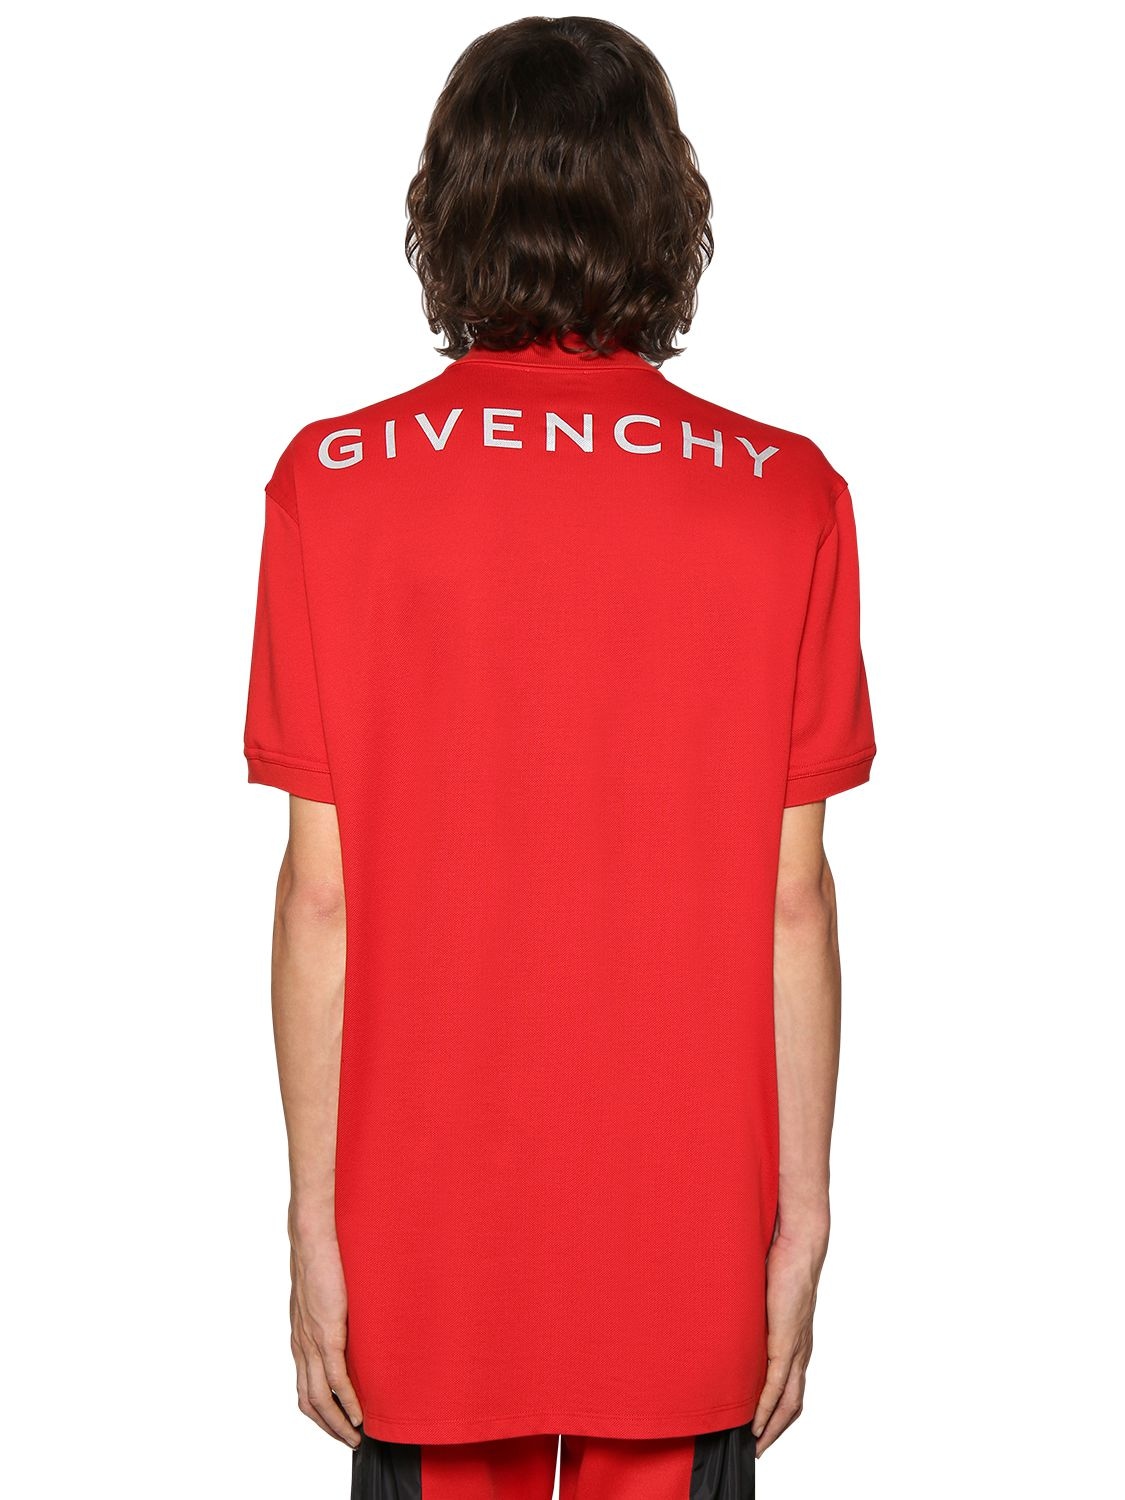 Givenchy 廓形反光logo纯棉polo衫 In Red